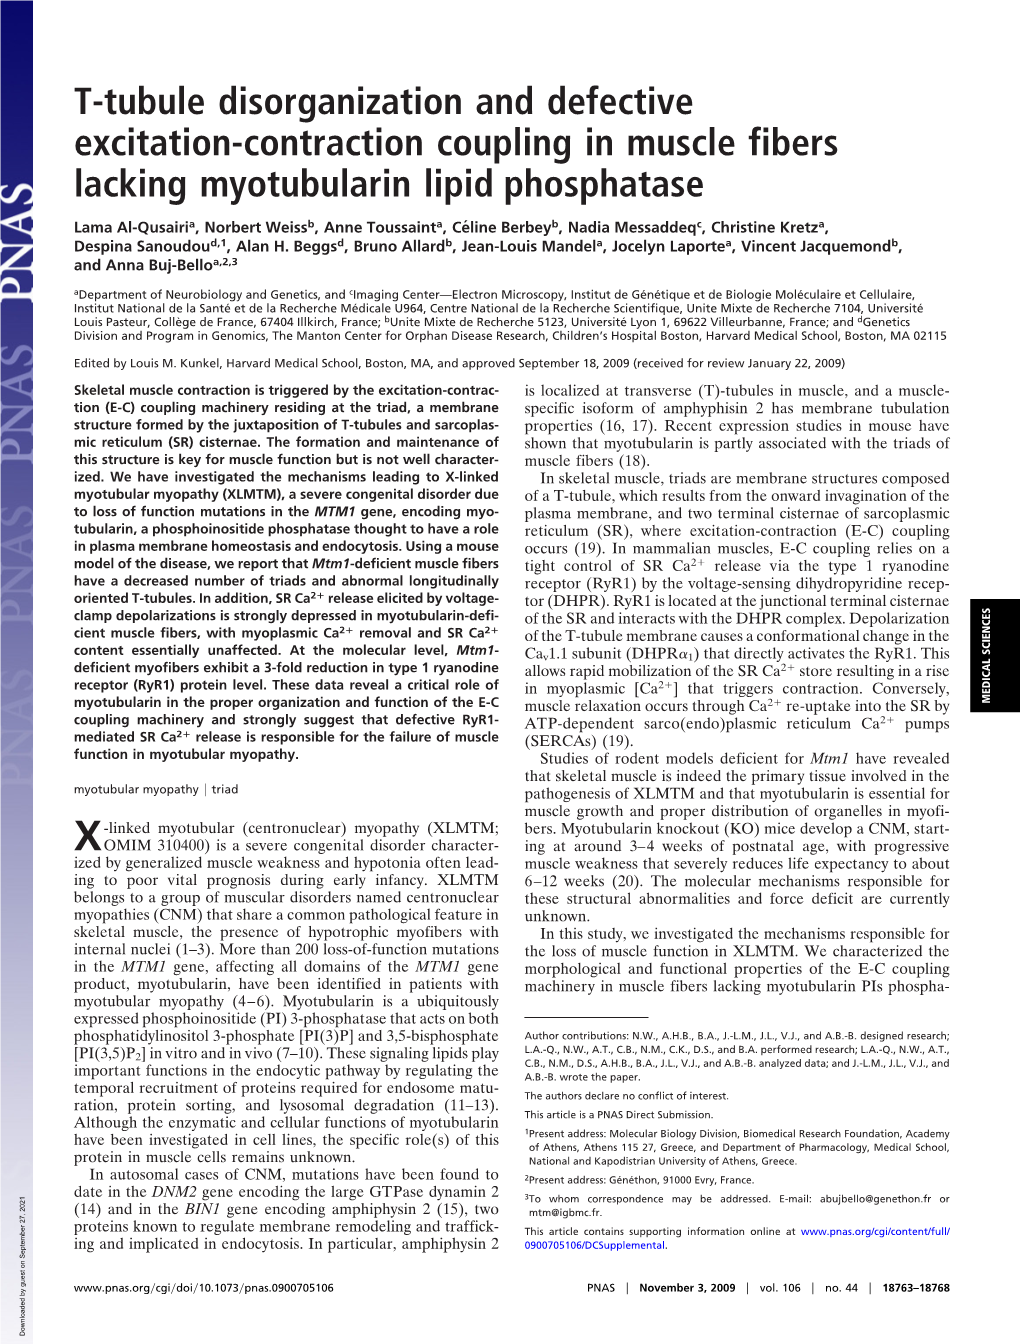 T-Tubule Disorganization and Defective Excitation-Contraction Coupling in Muscle Fibers Lacking Myotubularin Lipid Phosphatase